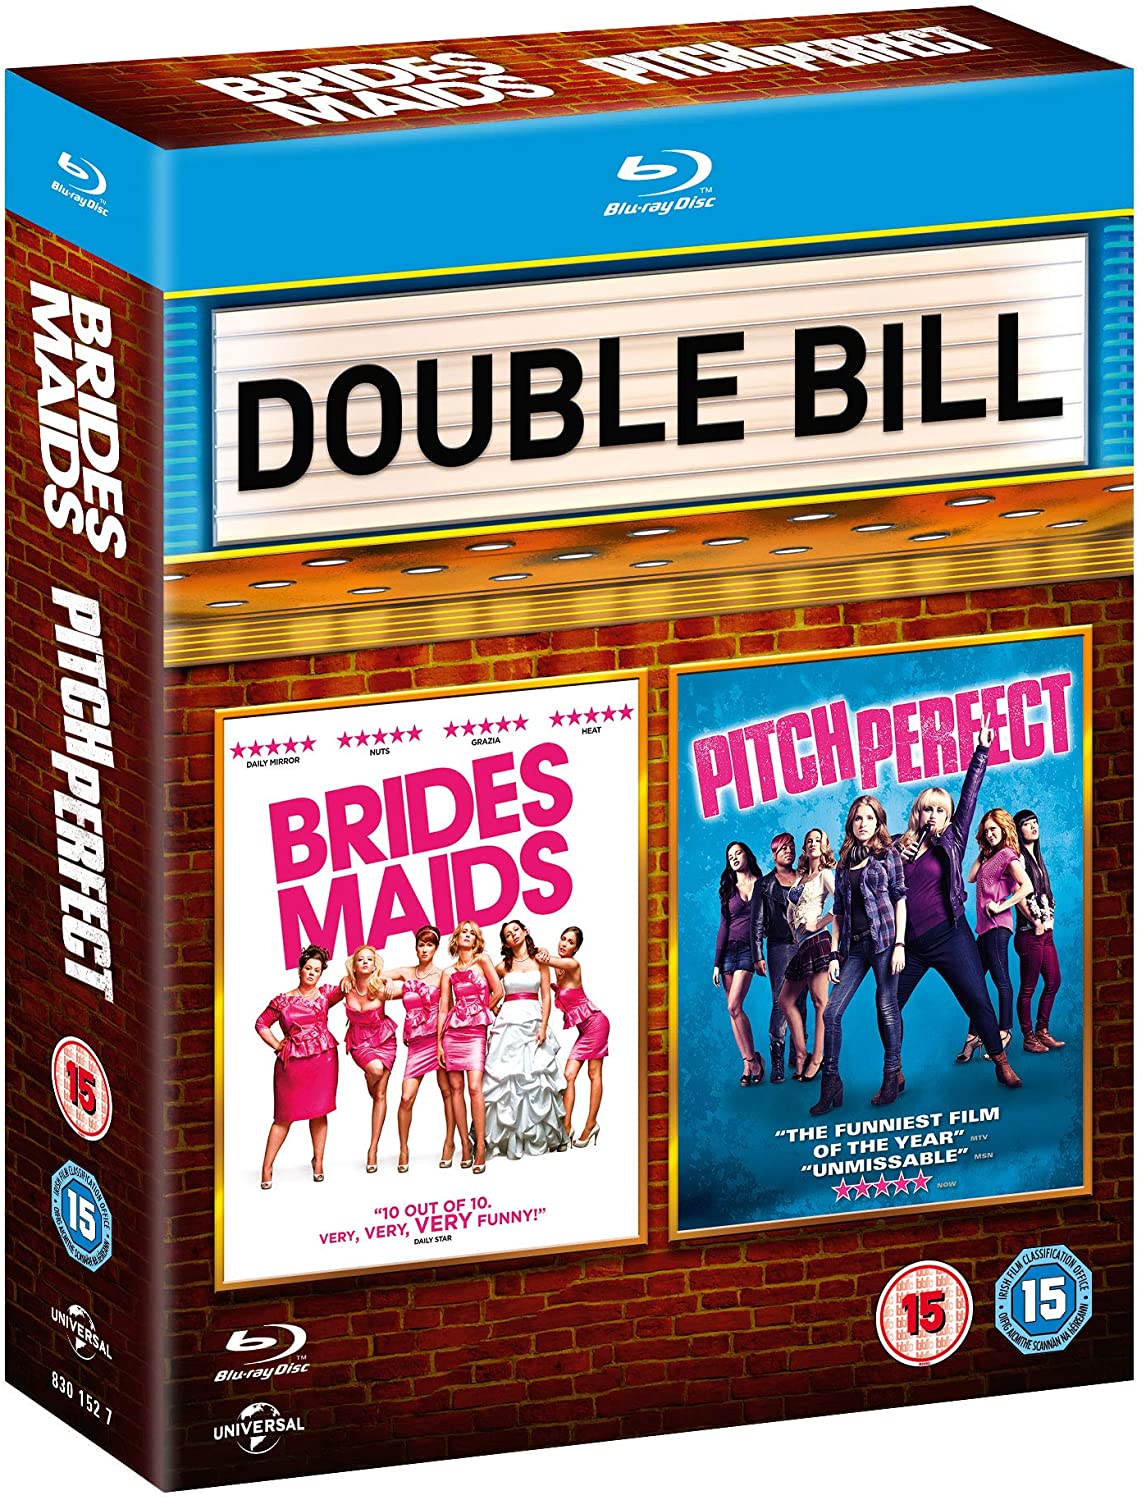 Bridesmaids / Pitch Perfect 2 Film Collection (Blu-ray)